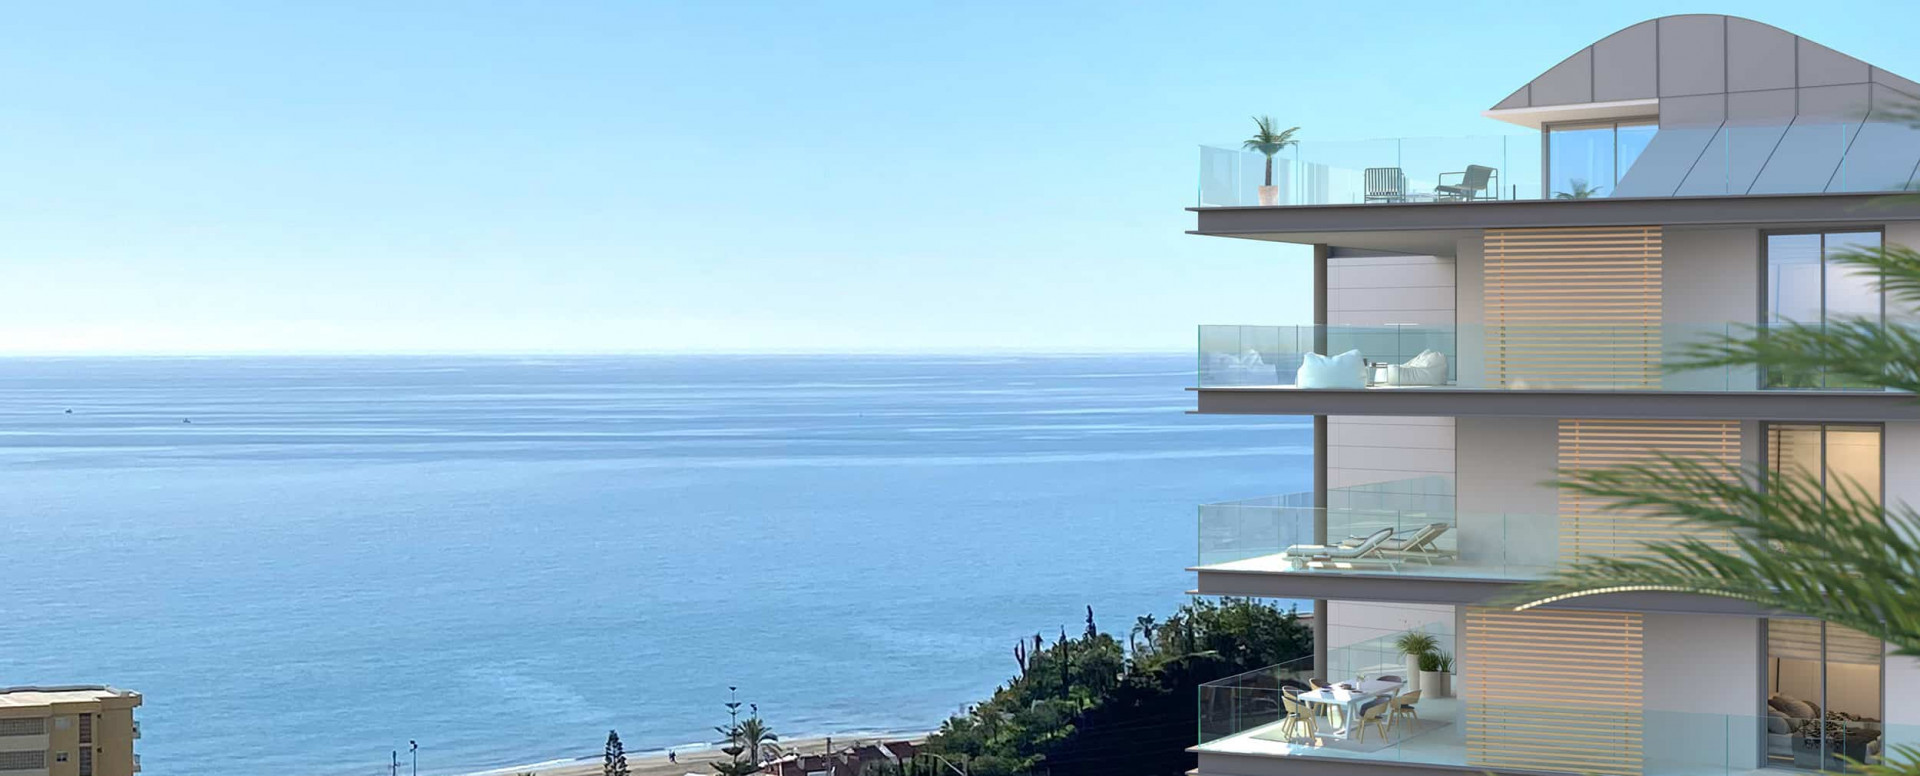 Seaviews Reserve: Flats and penthouses with views of the Benalmádena coast. | Image 2